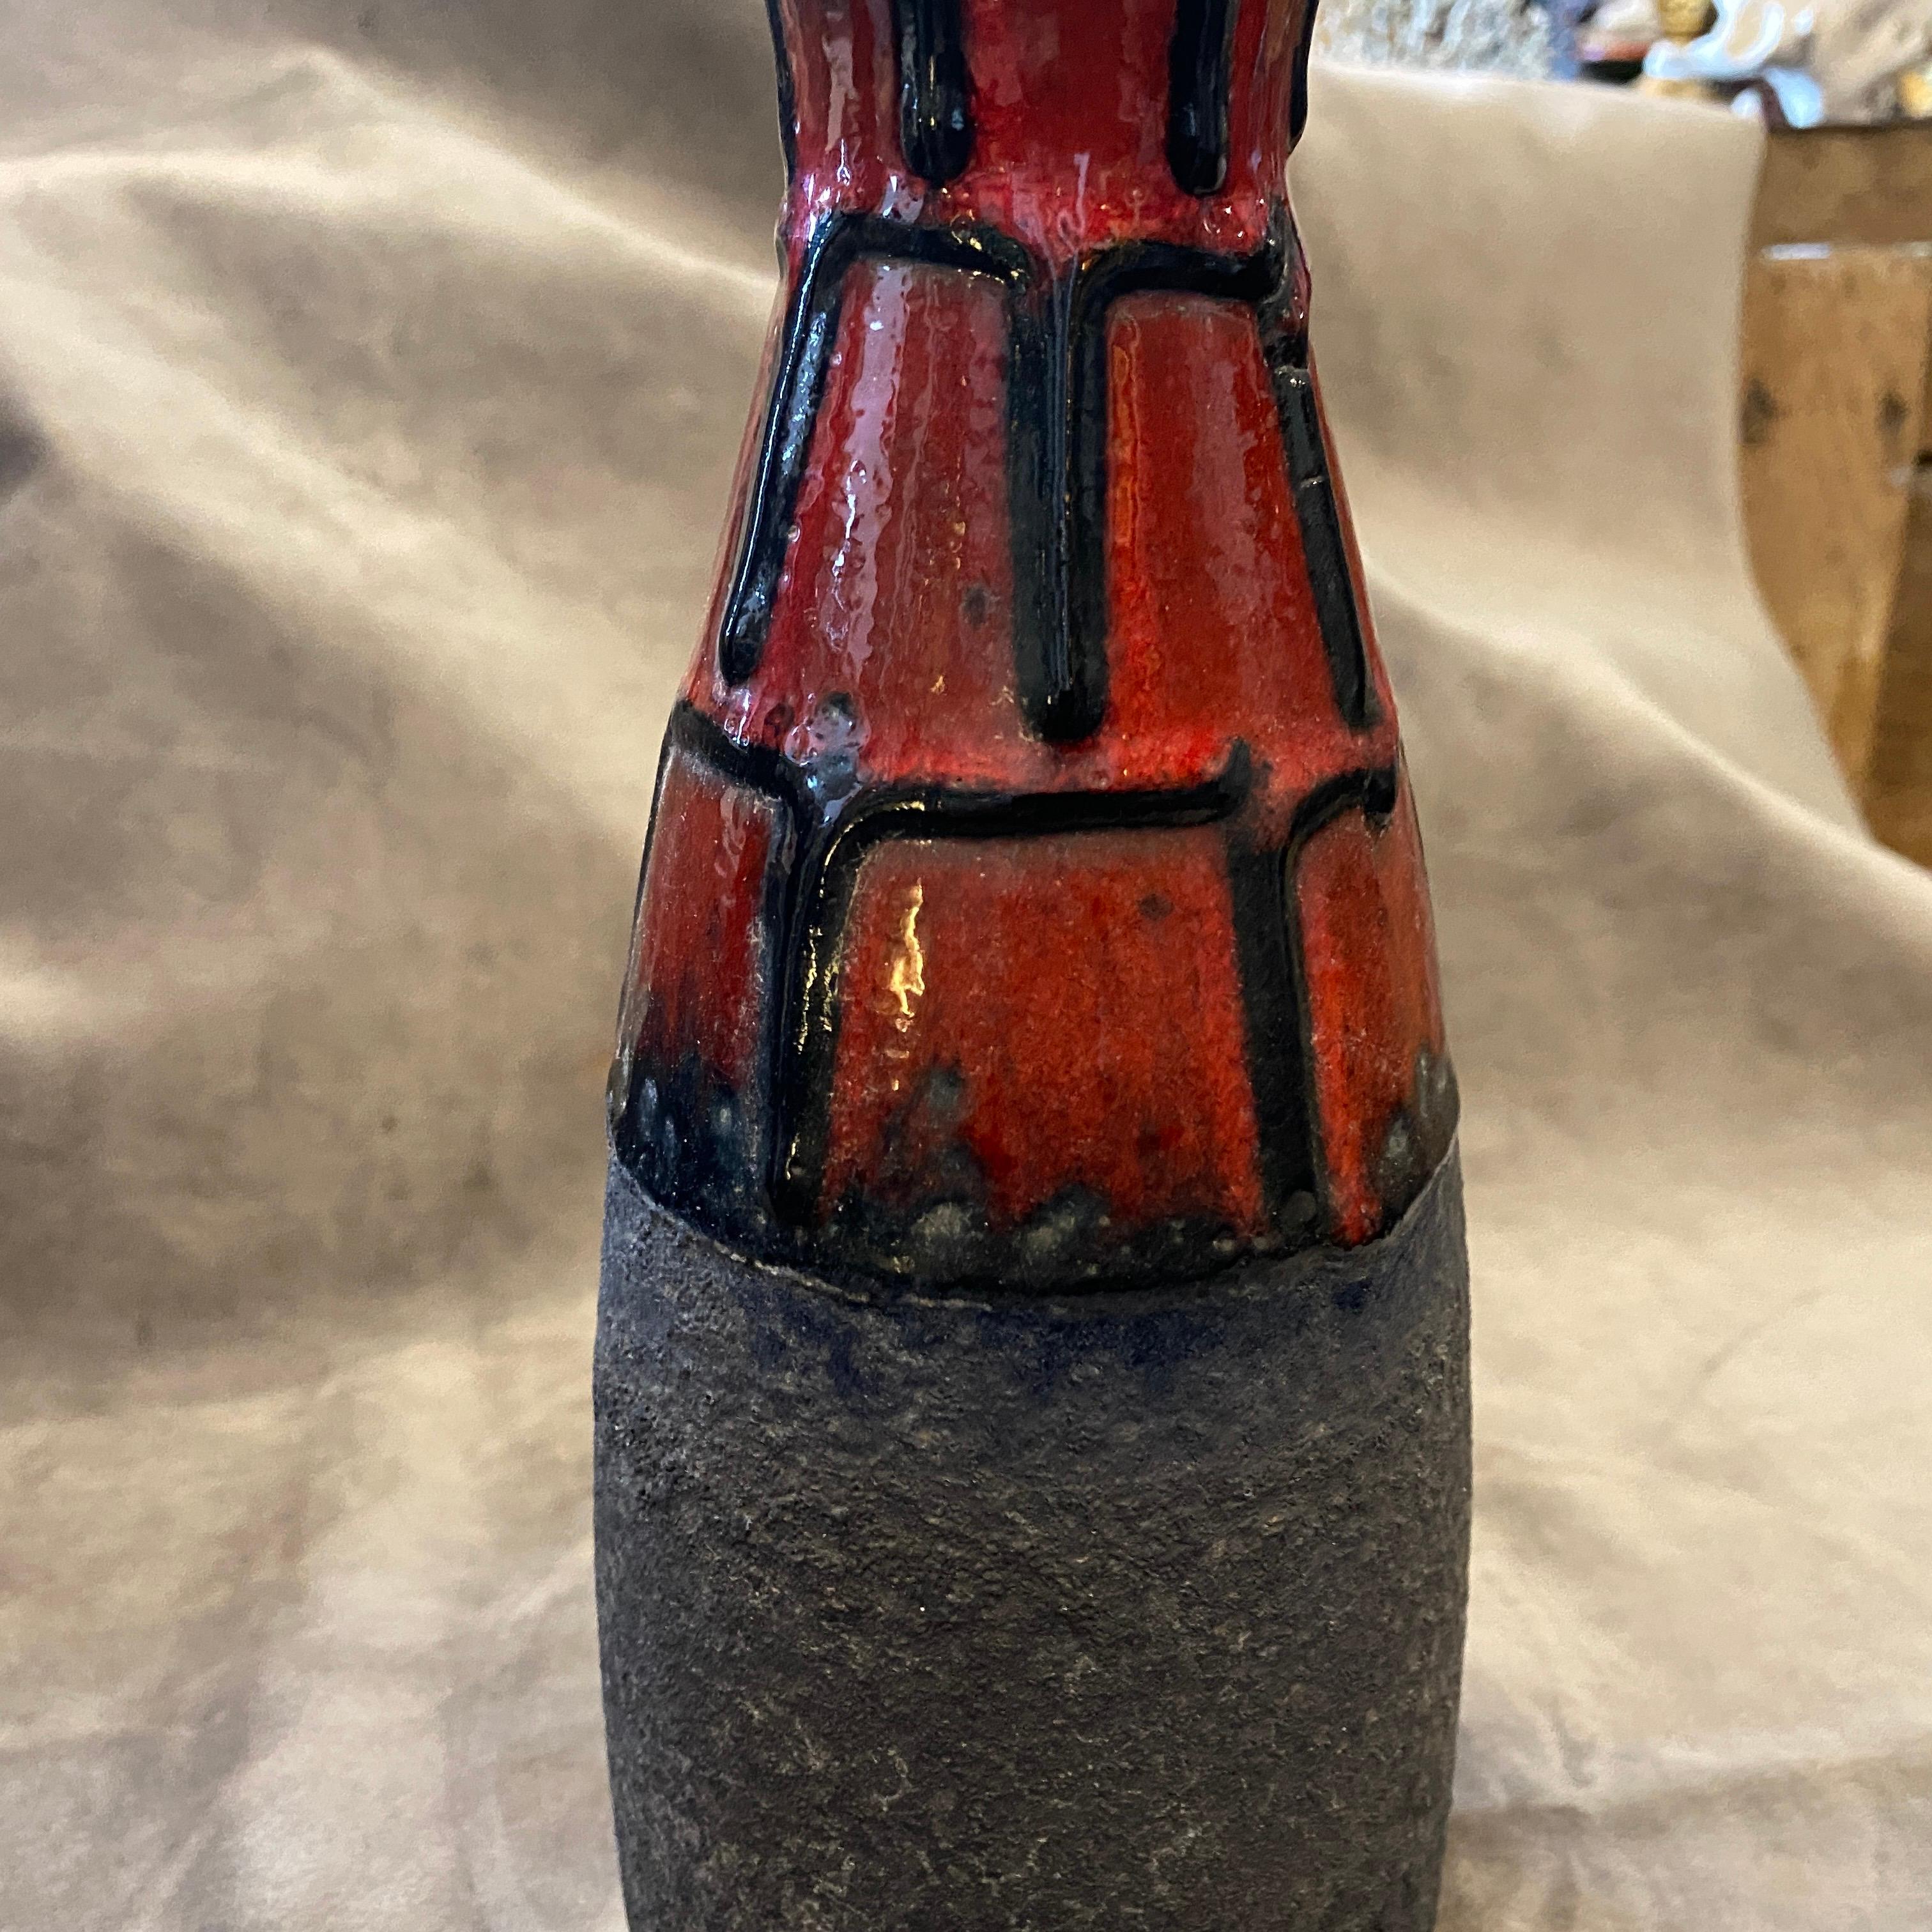 1970s Mid-Century Modern Red and Black Fat Lava Ceramic Vase by Roth In Good Condition For Sale In Aci Castello, IT